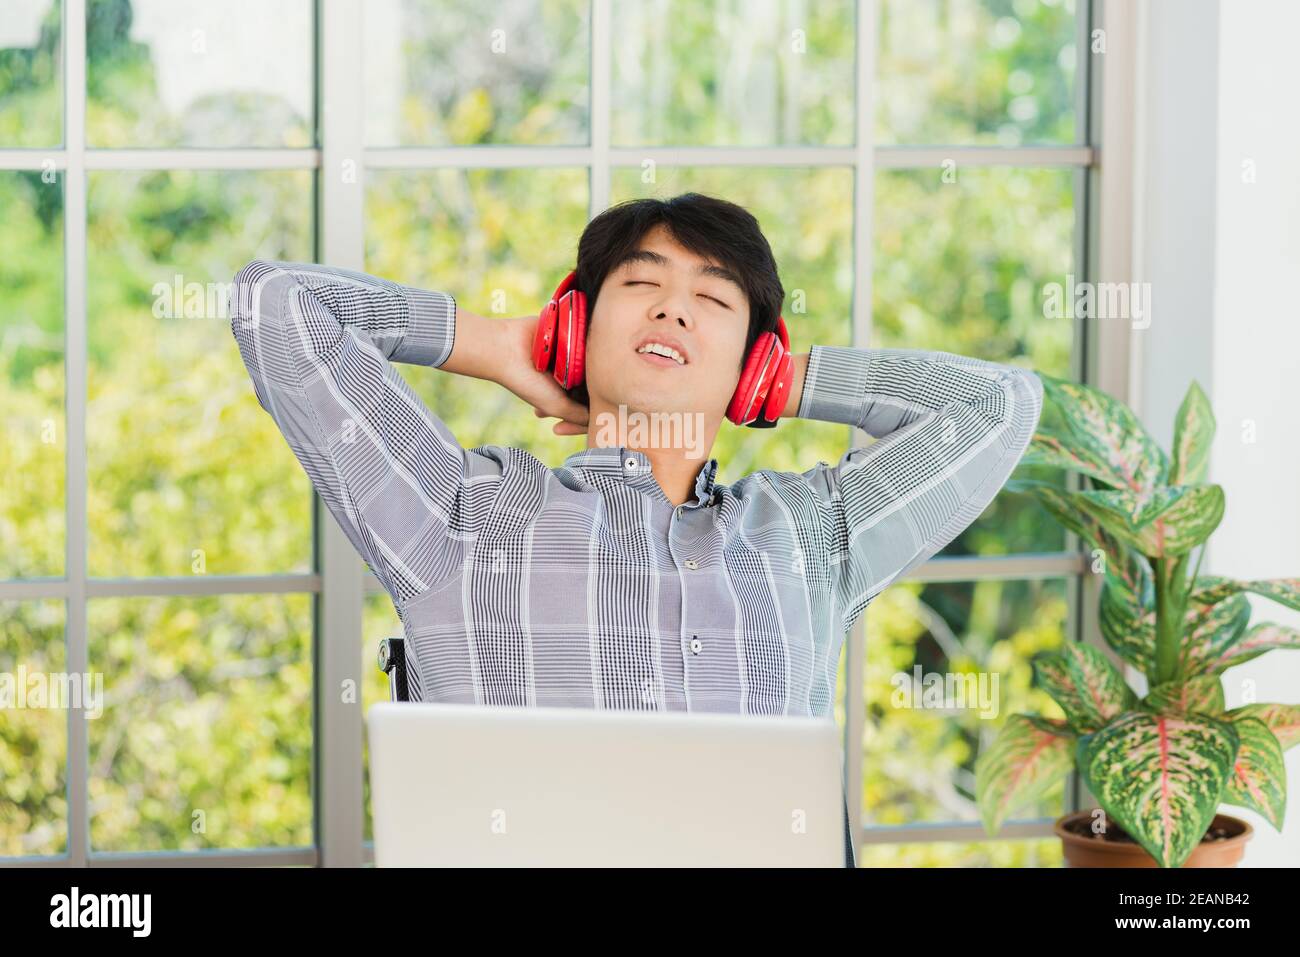 business man smile listening music in red headphone at home office Stock Photo